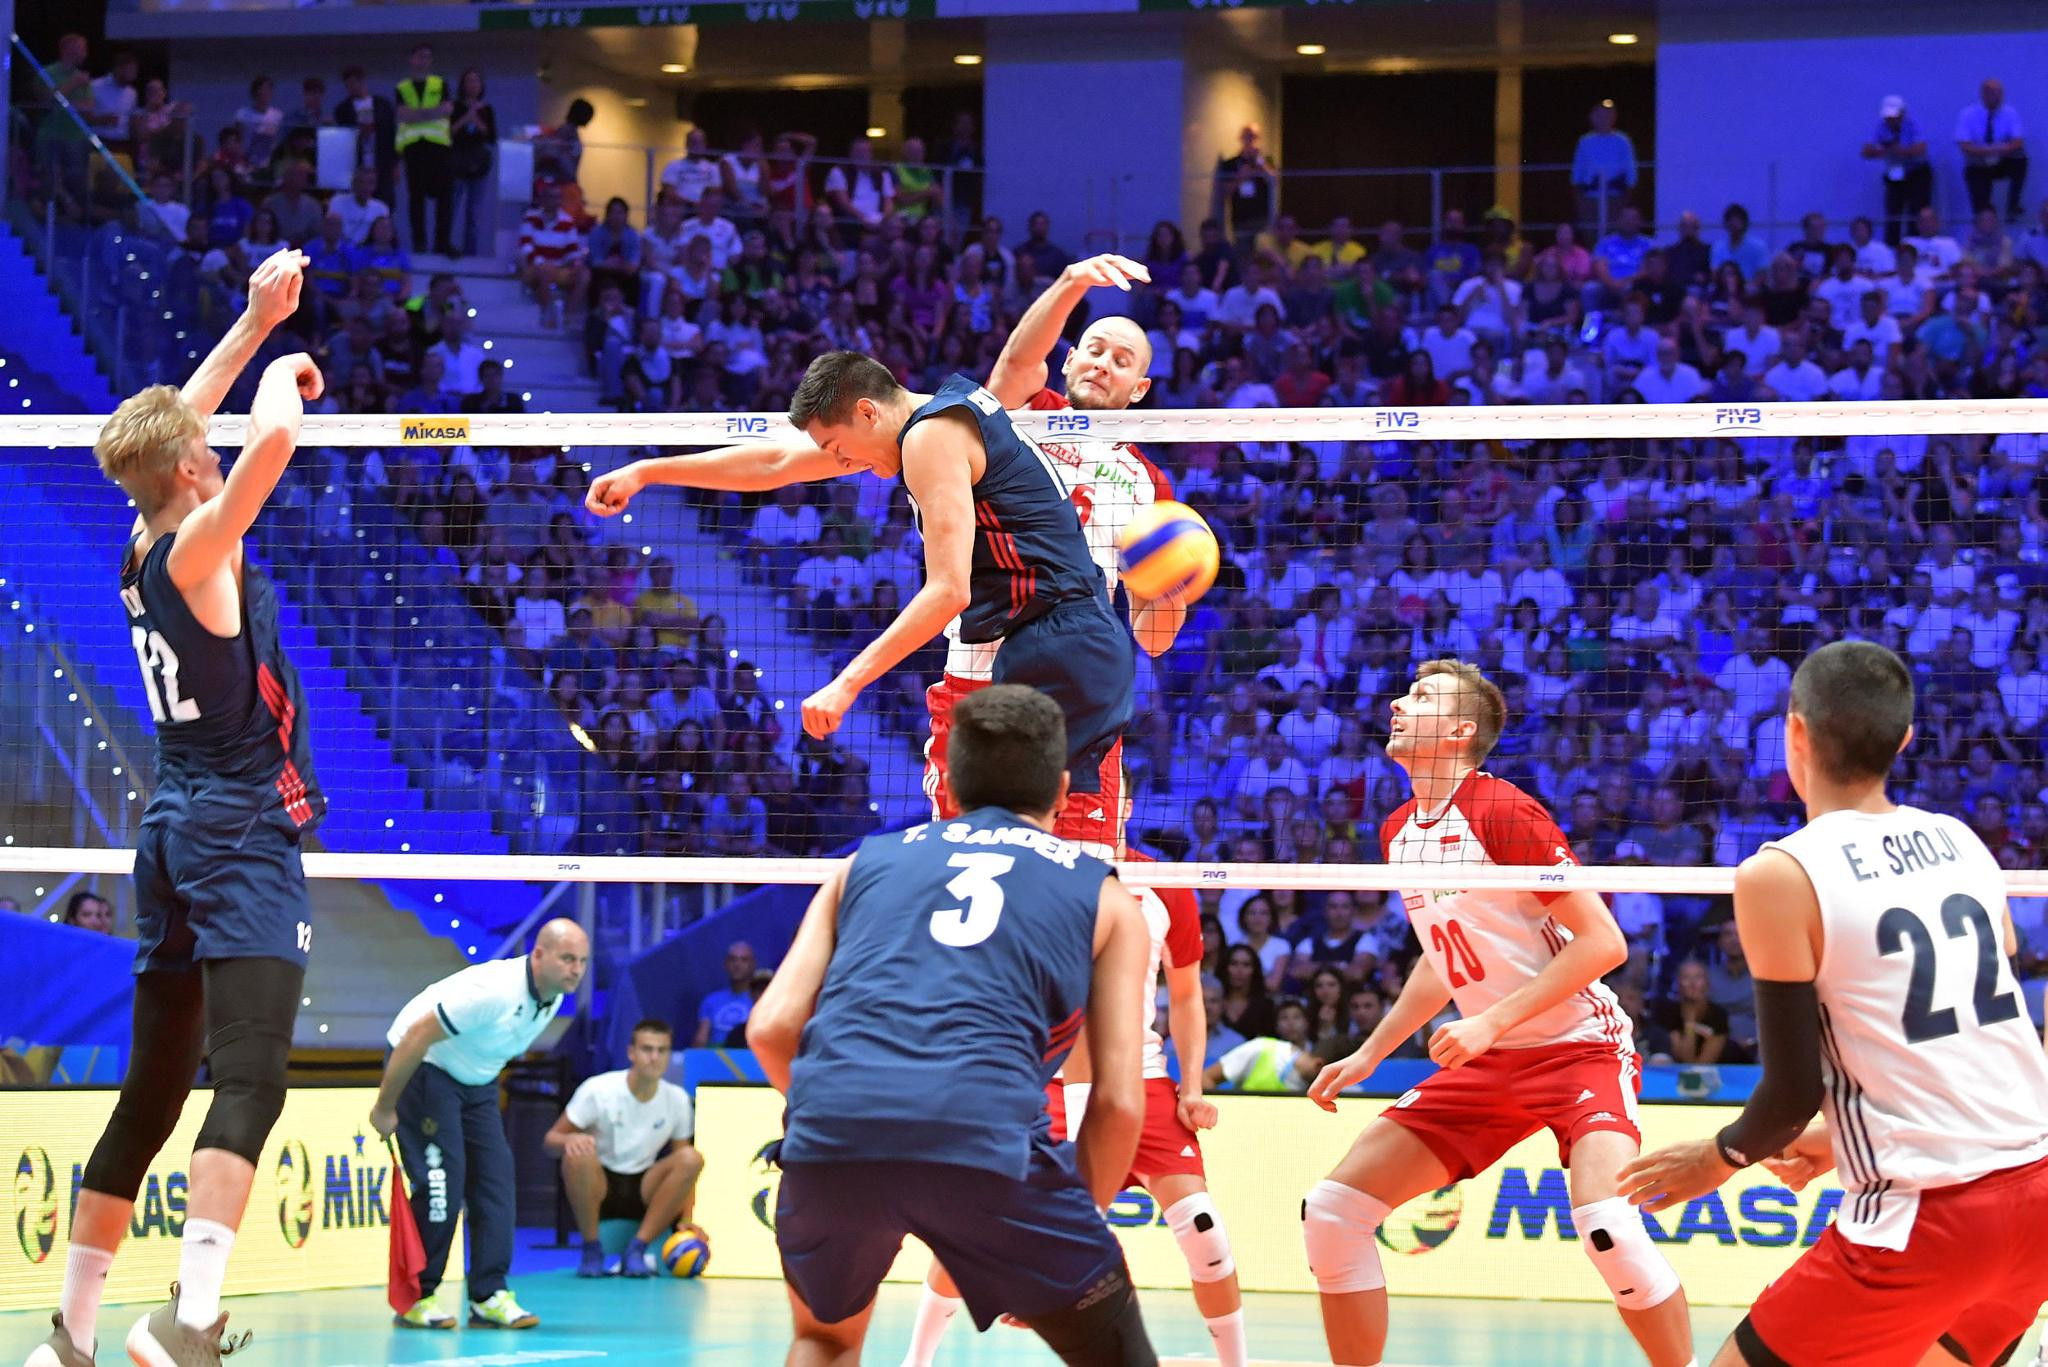 Poland beat the United States in the semi-final of the FIVB Men's Volleyball World Championships in Turin, Italy ©FIVB